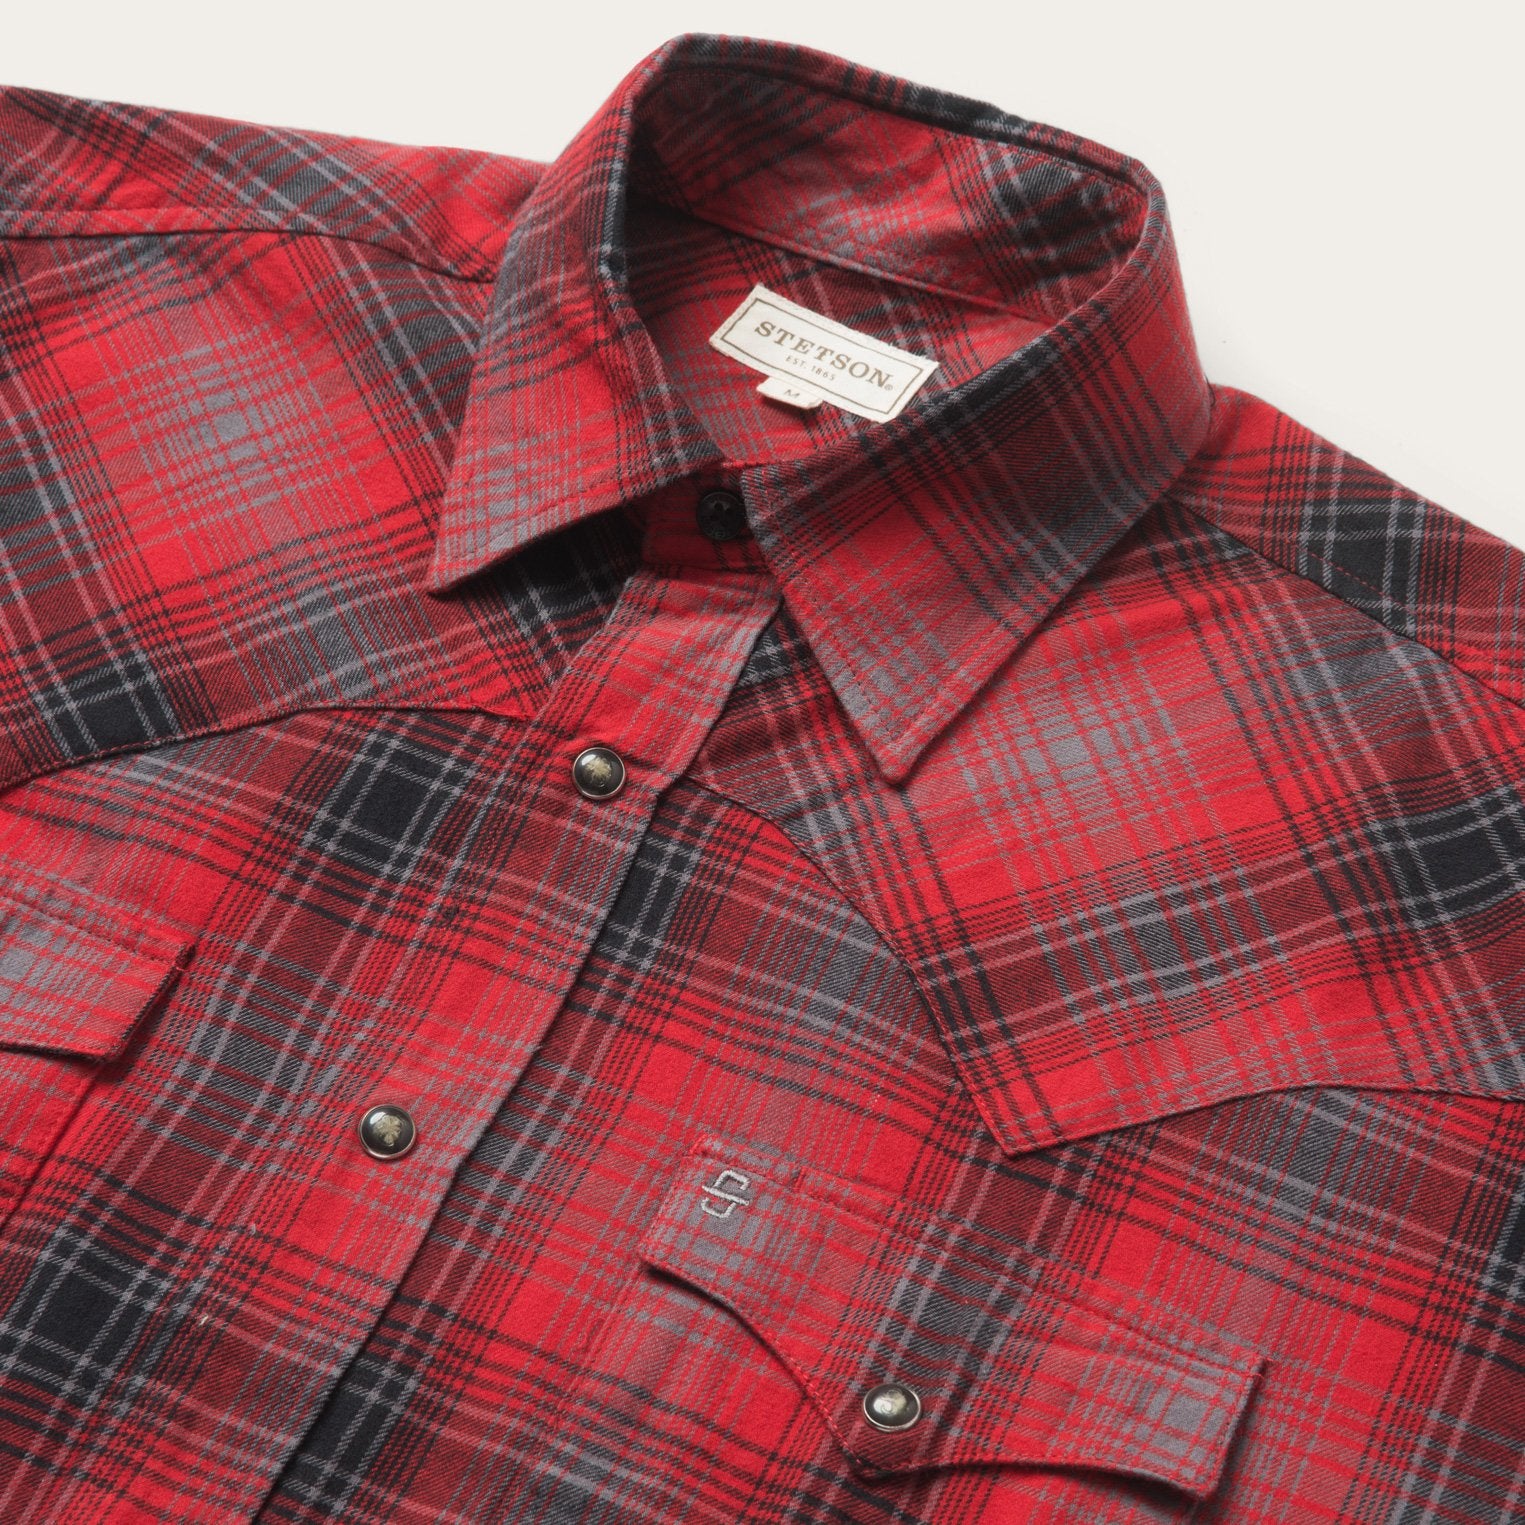 Classic Flannel Western Shirt in Red Plaid | Stetson